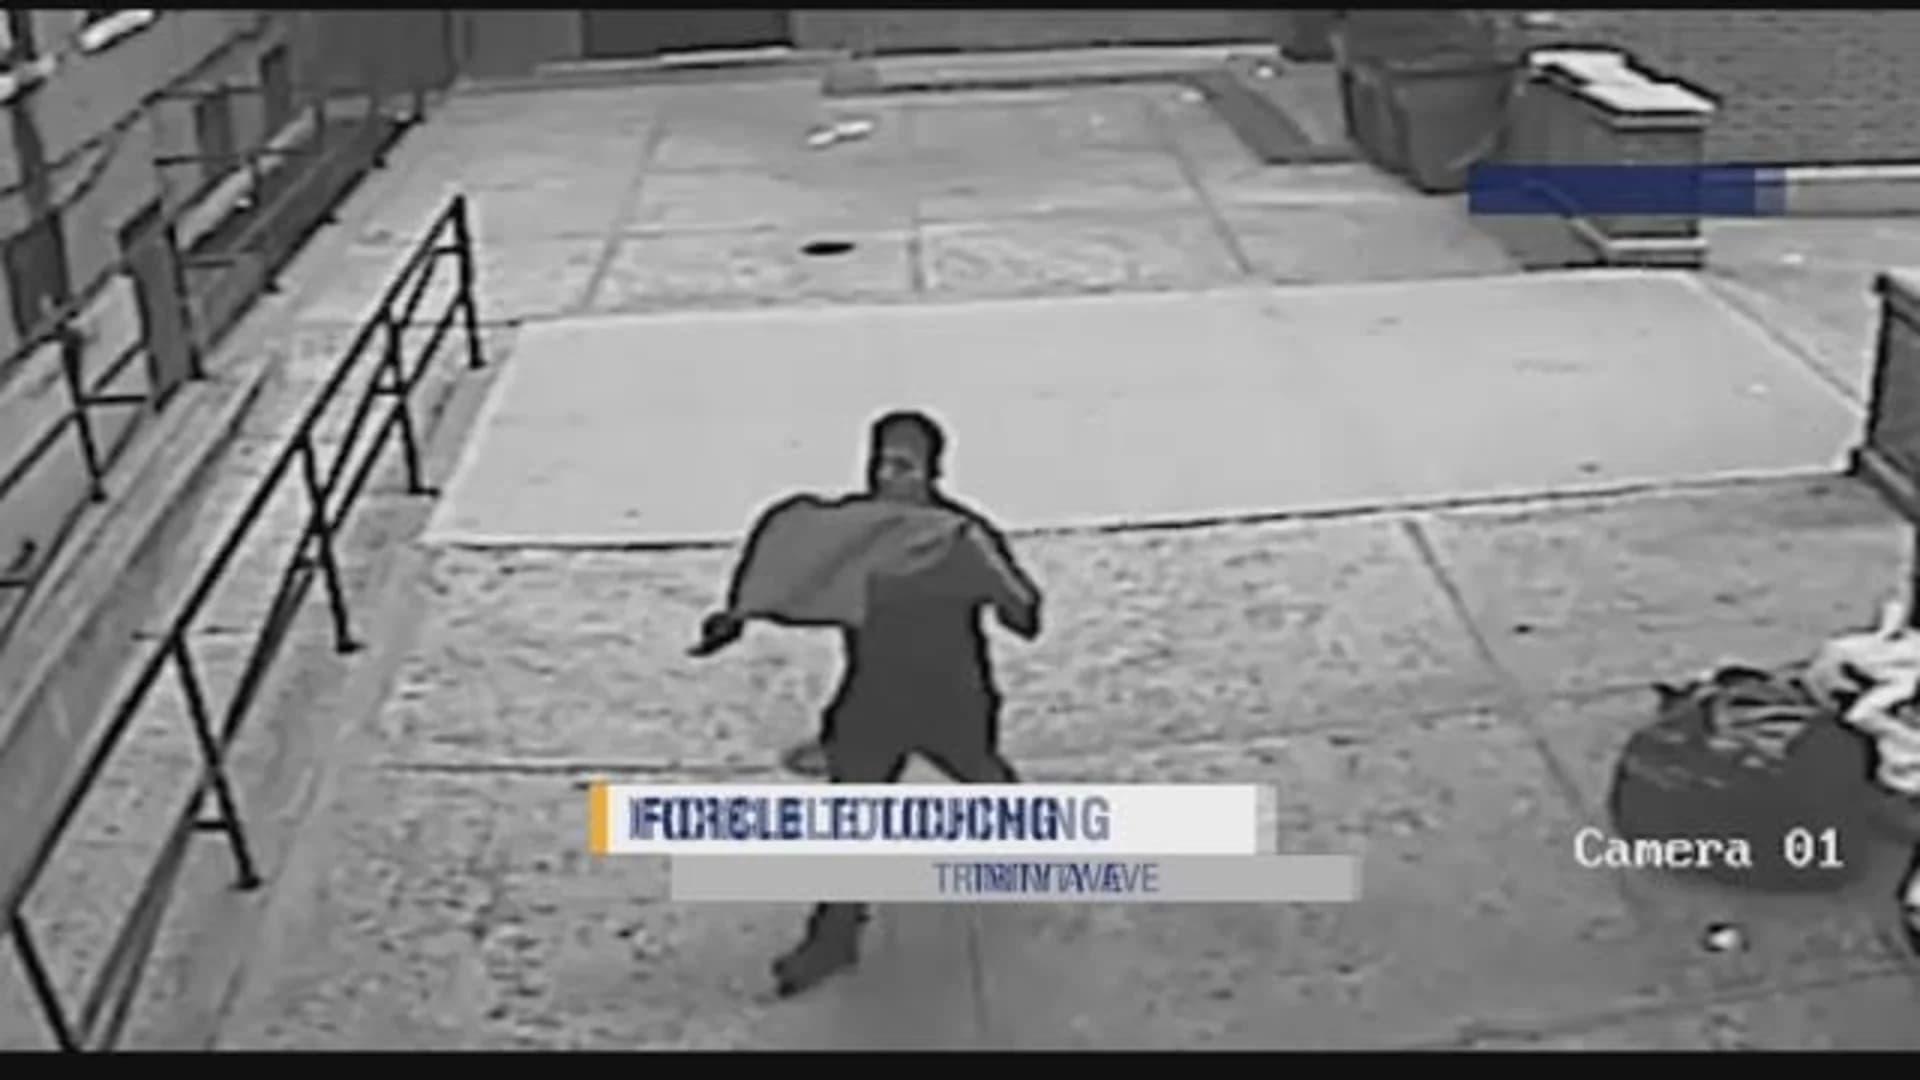 Man accused of groping 14-year-old girl in the Bronx